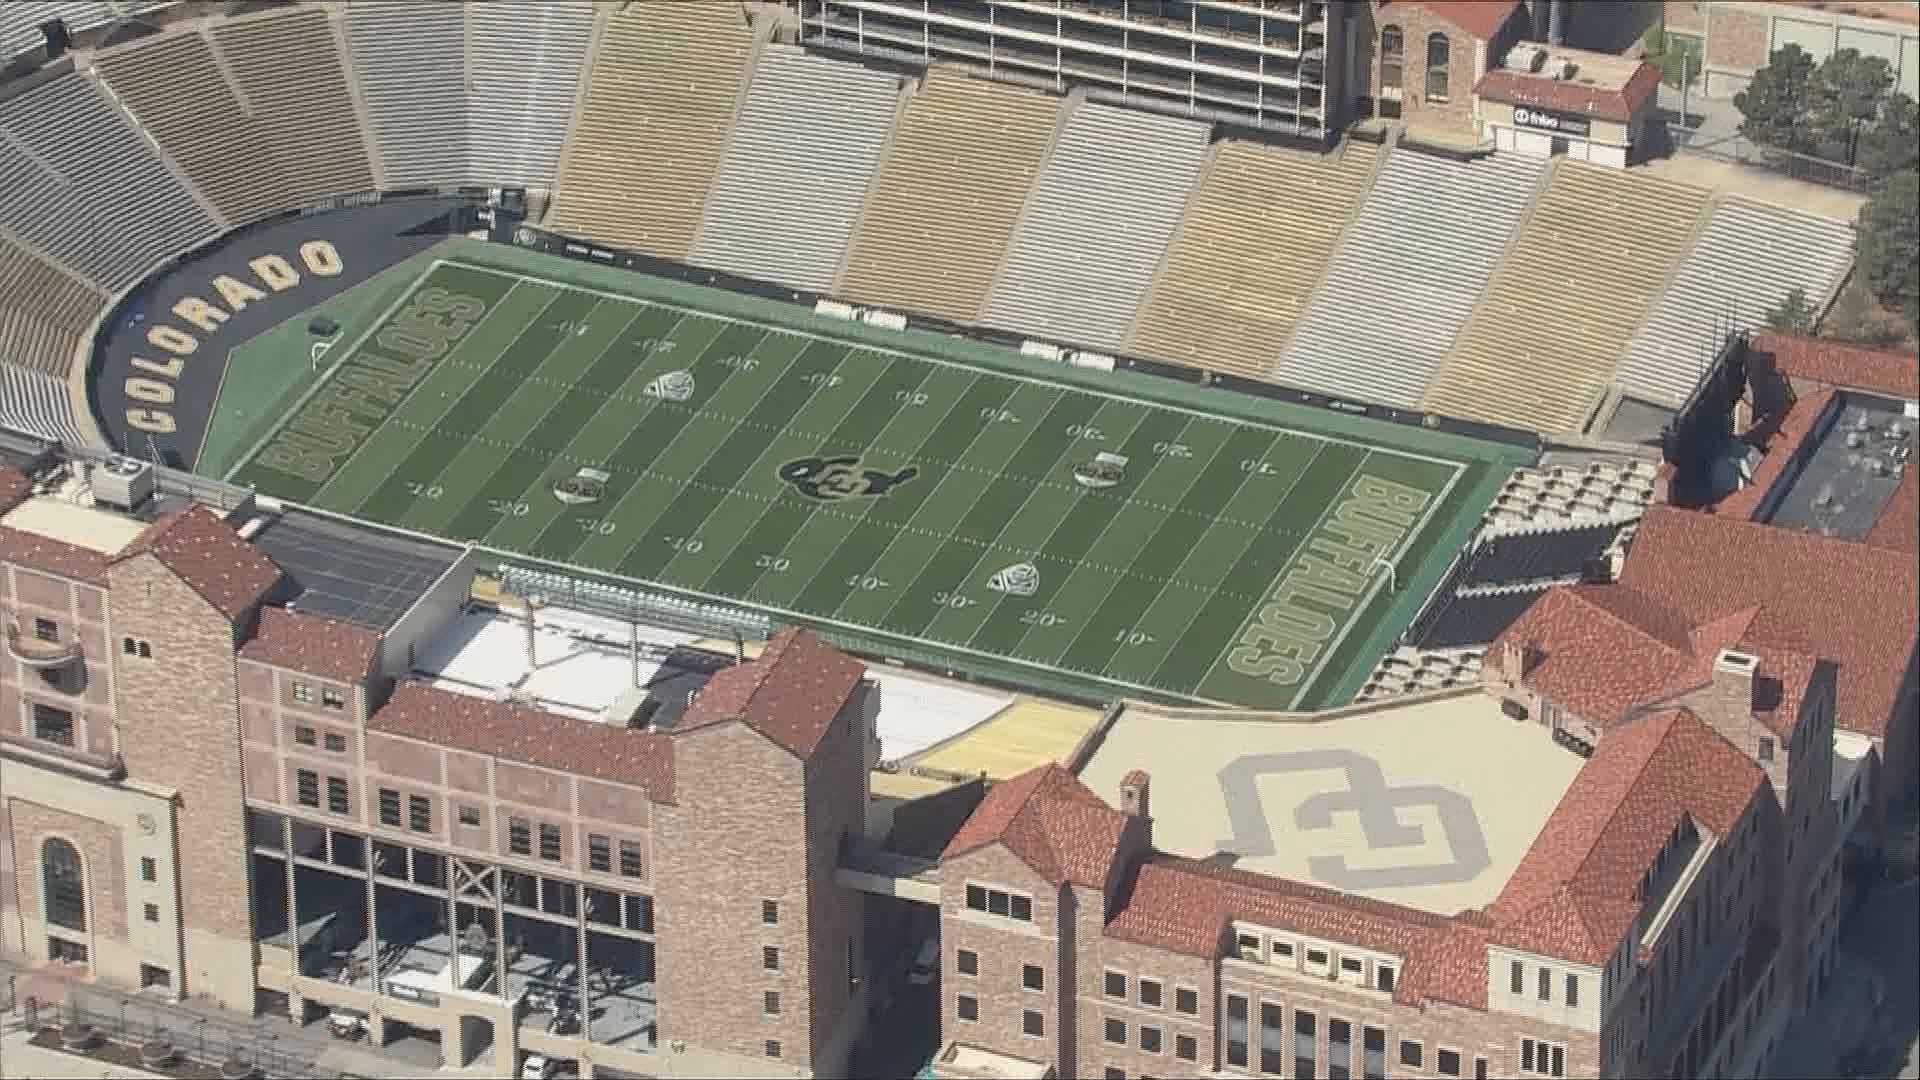 The event will feature festivities over multiple days including the spring game, a CU football alumni reunion, a talent show and a concert by rapper Lil Wayne.